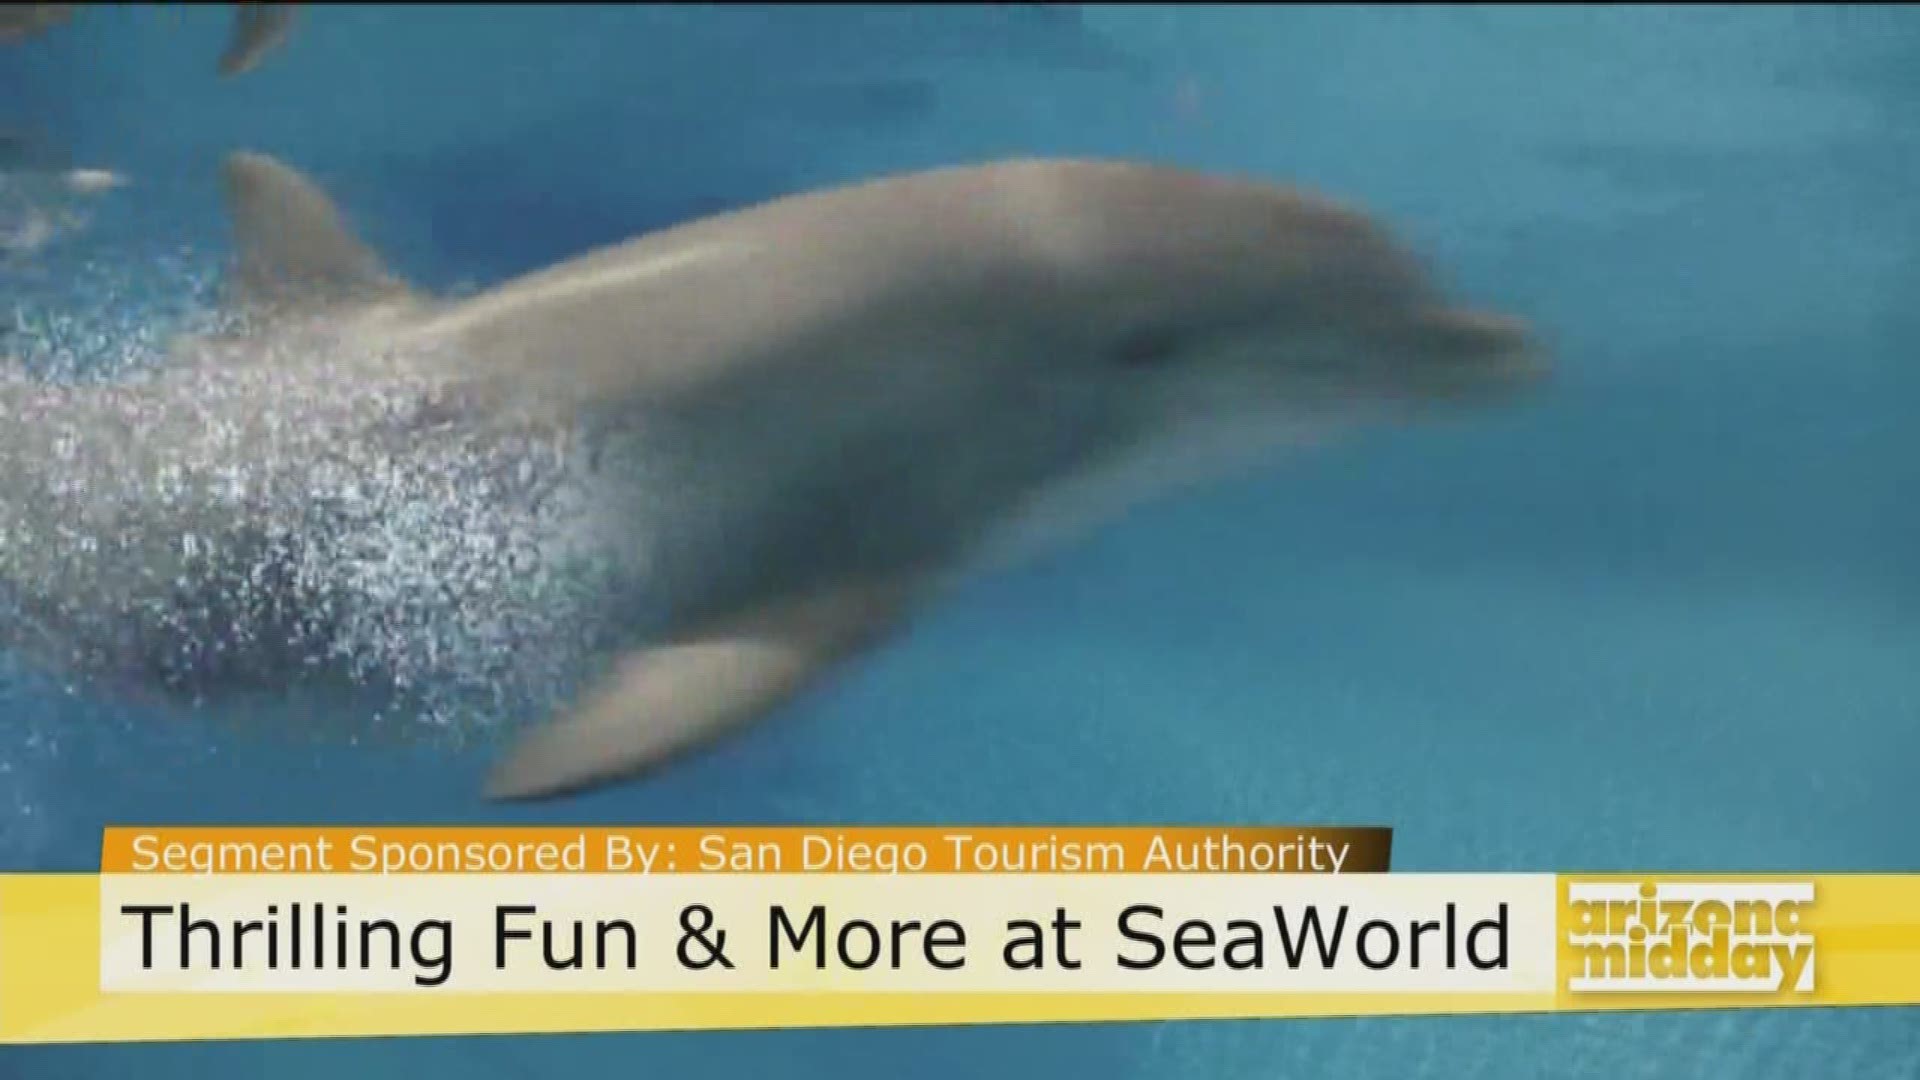 From sea animals to roller coasters, Tim Roberts with SeaWorld San Diego tells us about all the fun things to do at the amusement park.